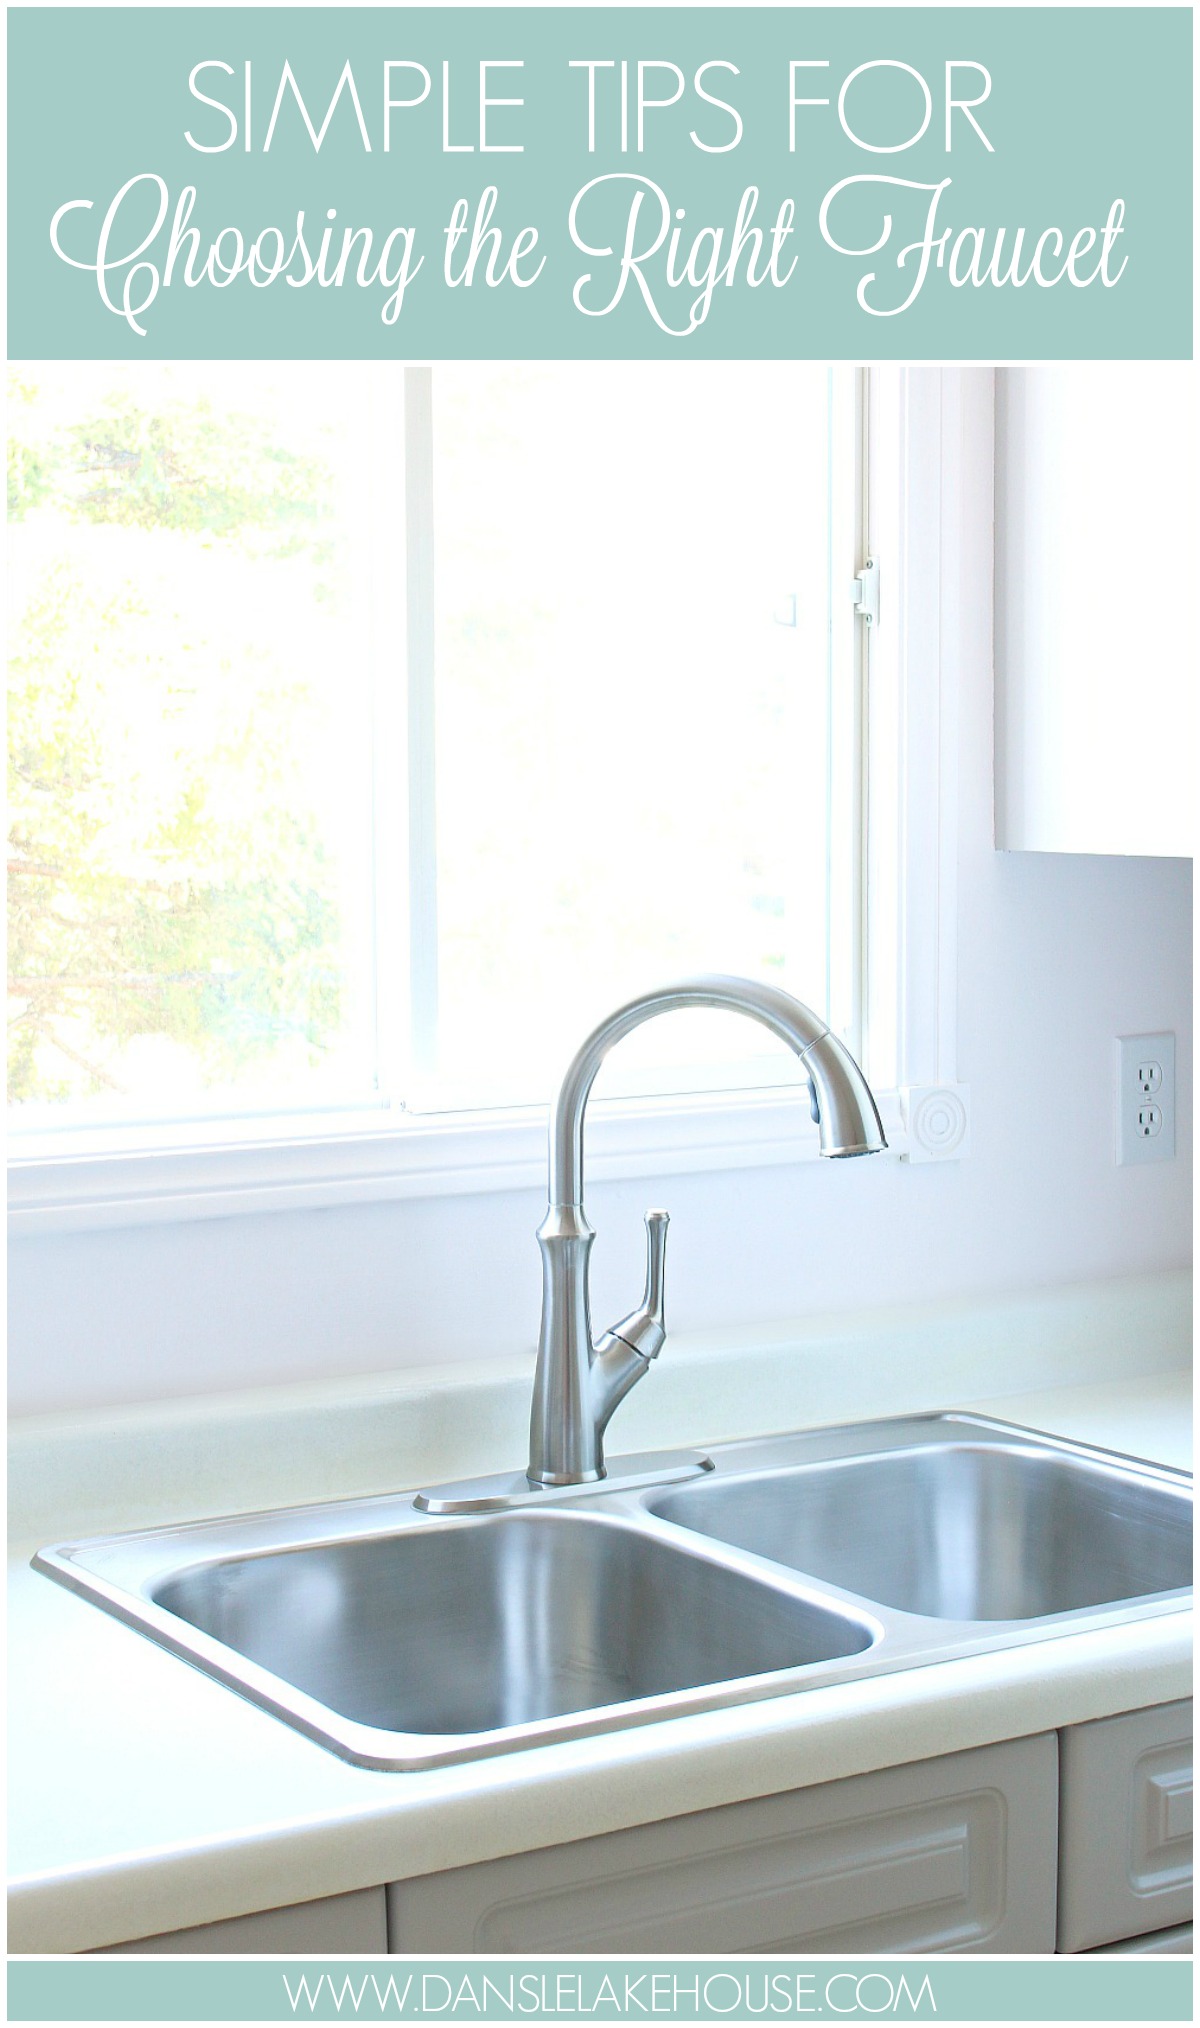 Simple Tips for Choosing the Right Kitchen Faucet | Pfister Tamera Faucet Review | Dans le Lakehouse #kitchenmakeover #kitchenfaucet #tips